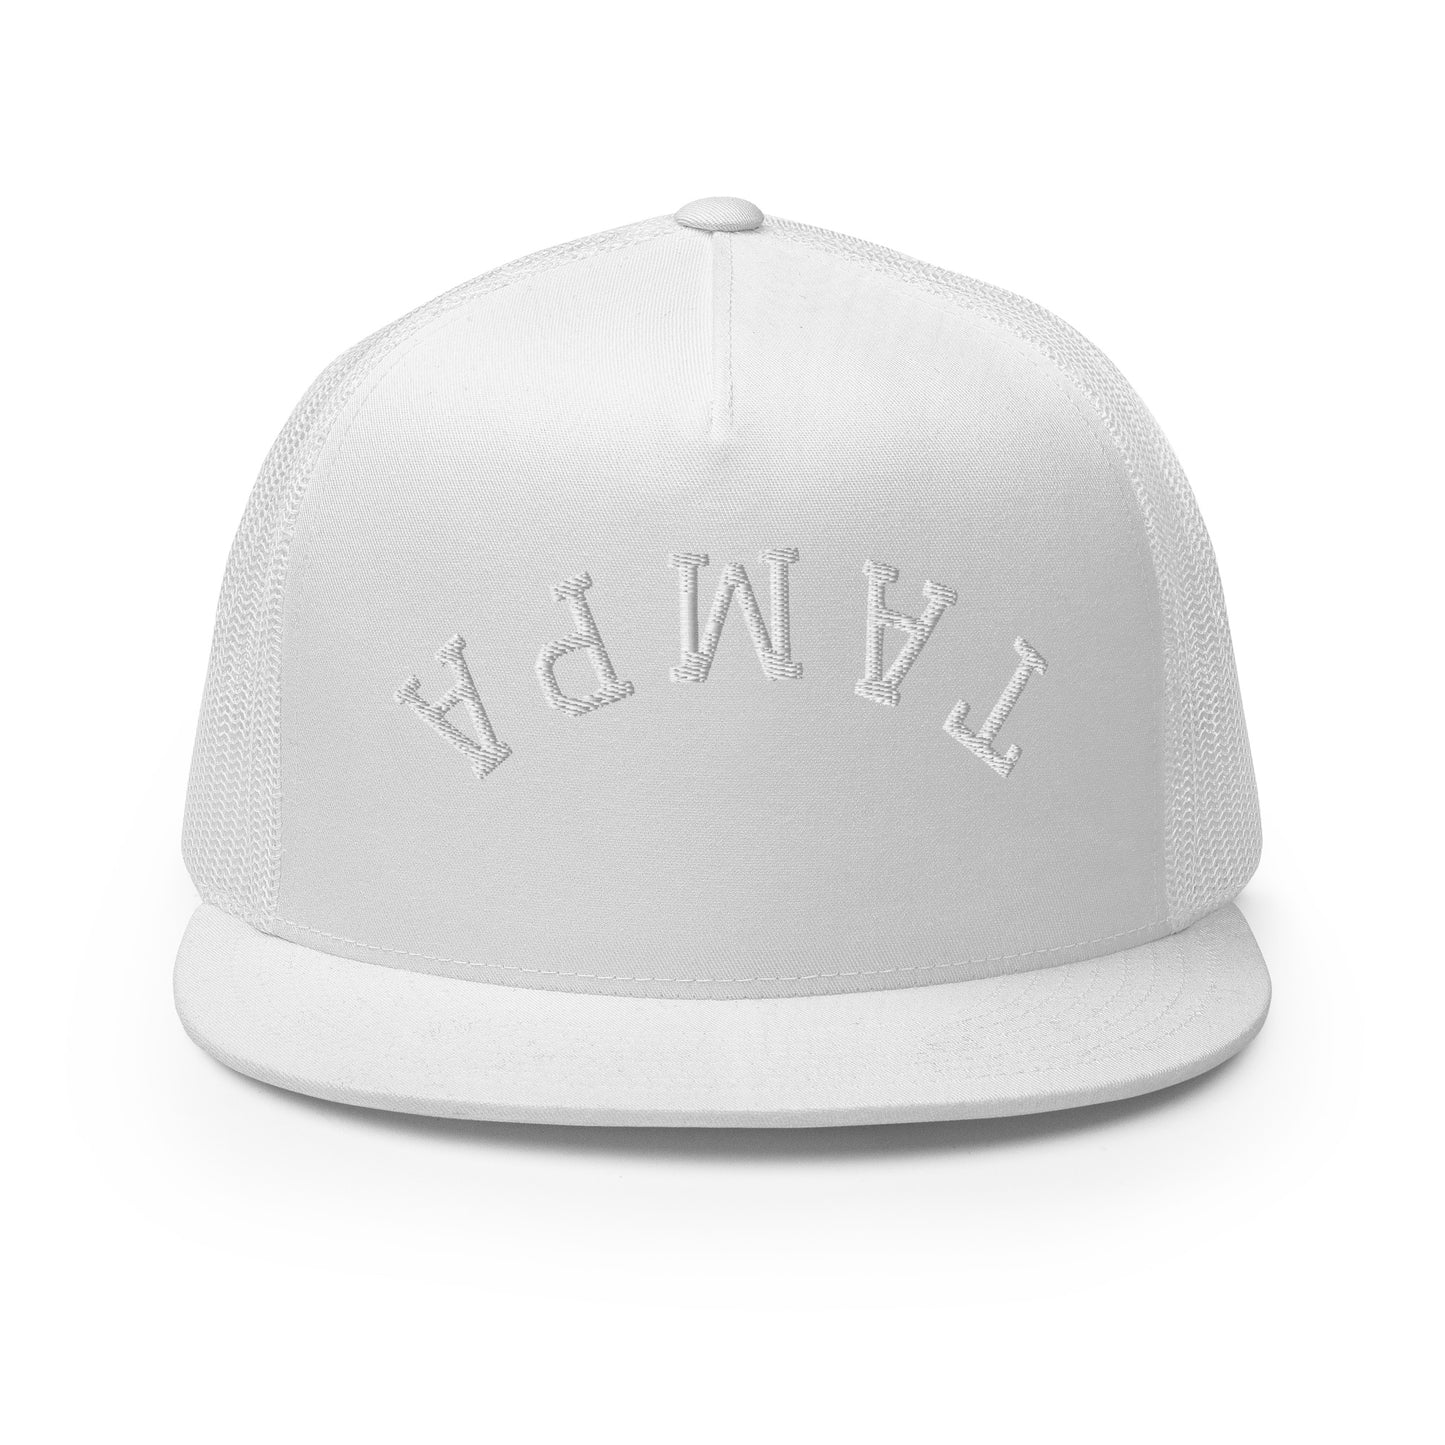 Tampa Upside Down Arch High 5 Panel A-Frame Snapback Trucker Hat